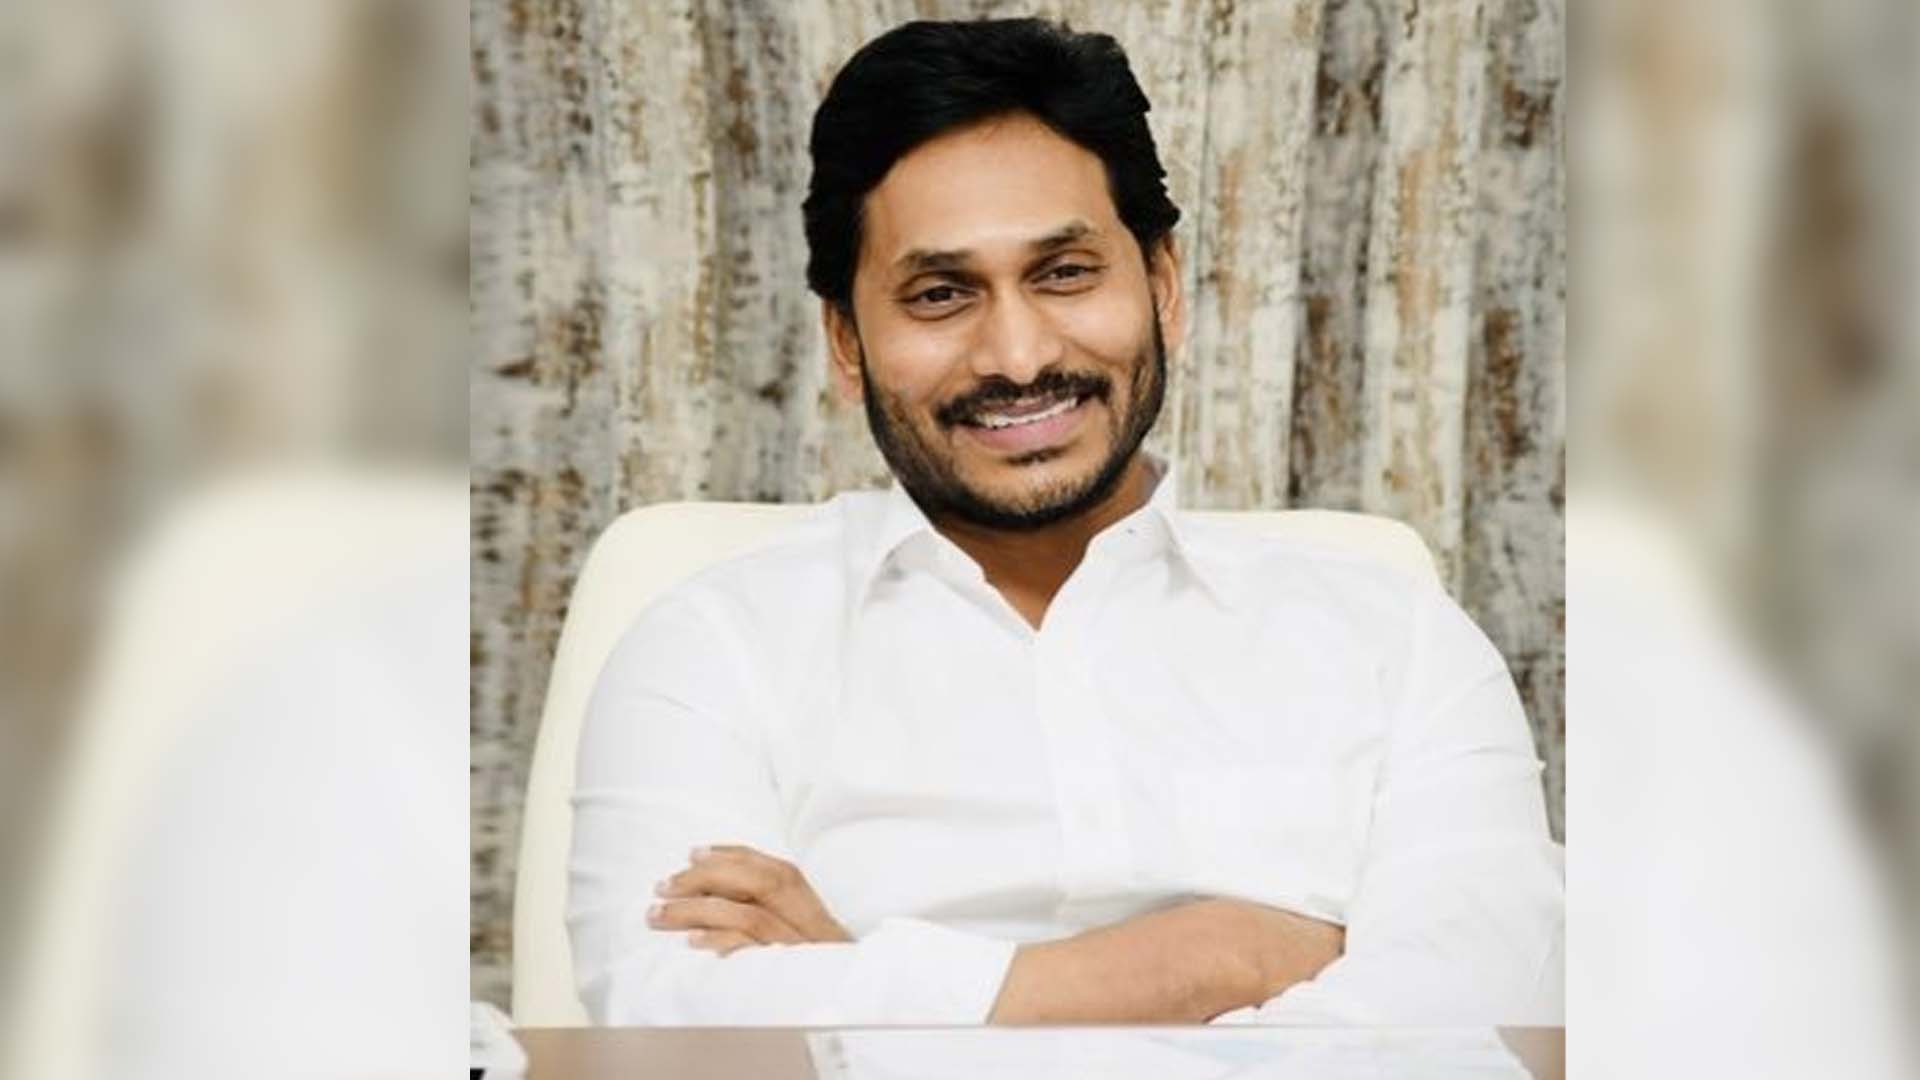 YSRCP announces its candidates for all 25 Lok Sabha seats and 175 Assembly constituencies in Andhra Pradesh